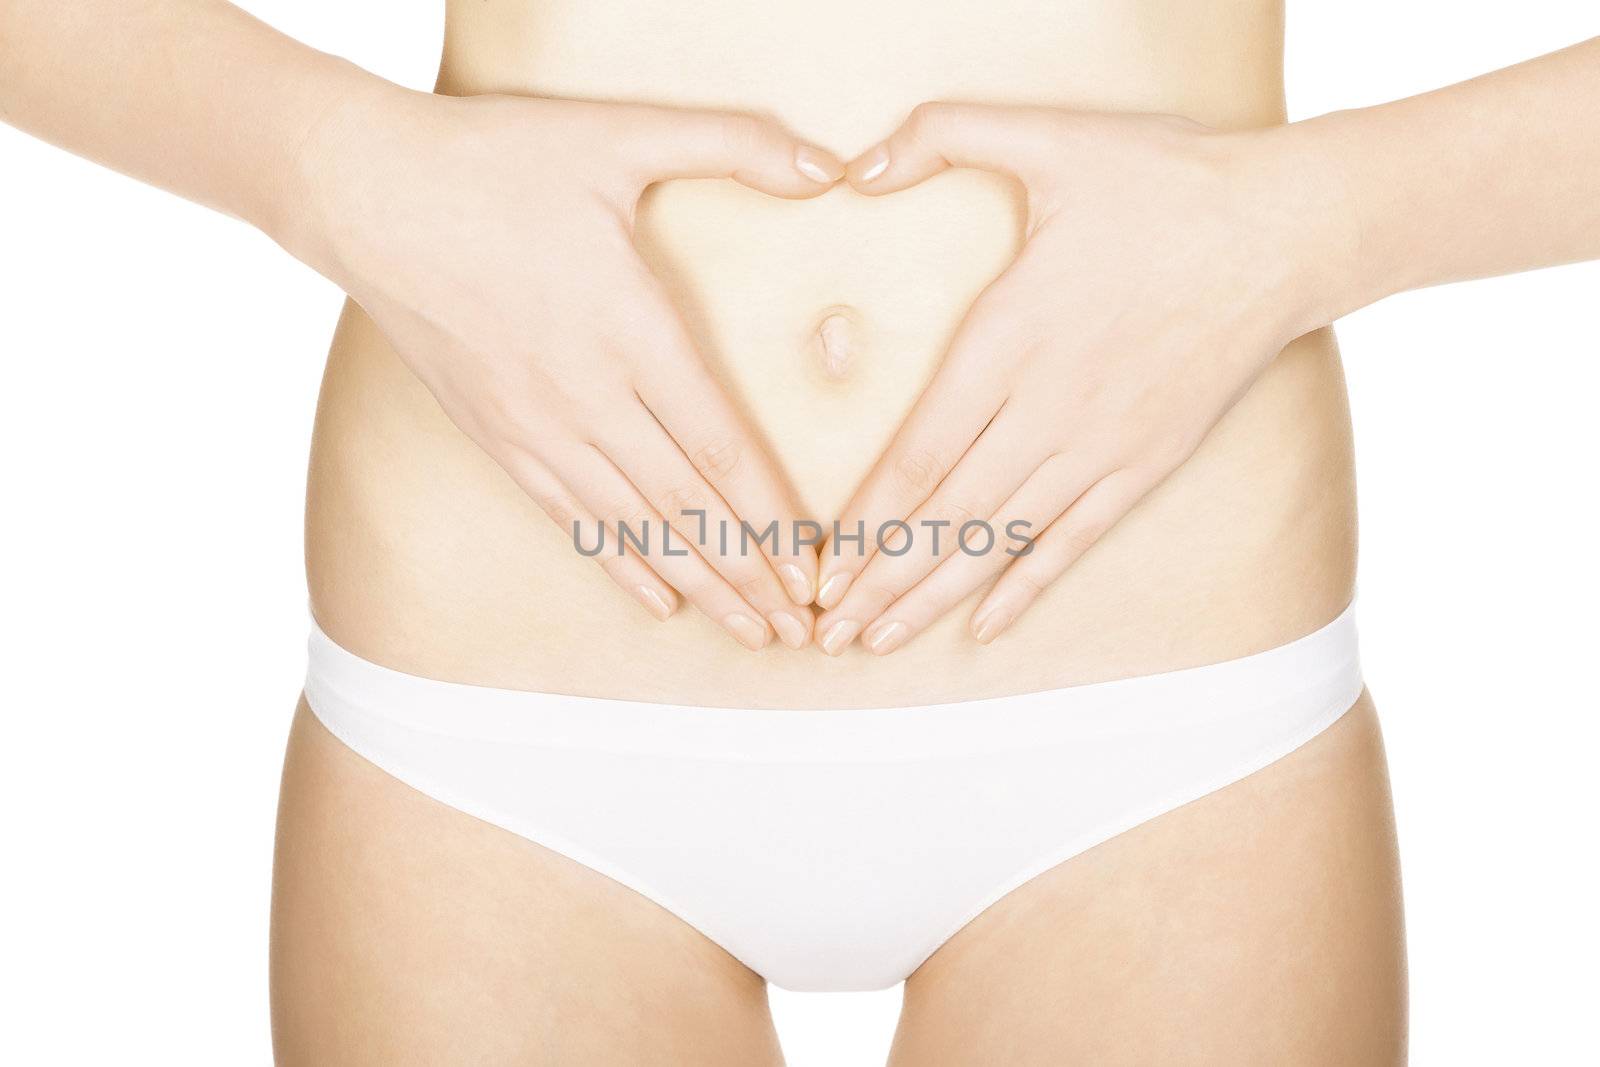 woman's hands forming a heart symbol on the belly by Nobilior